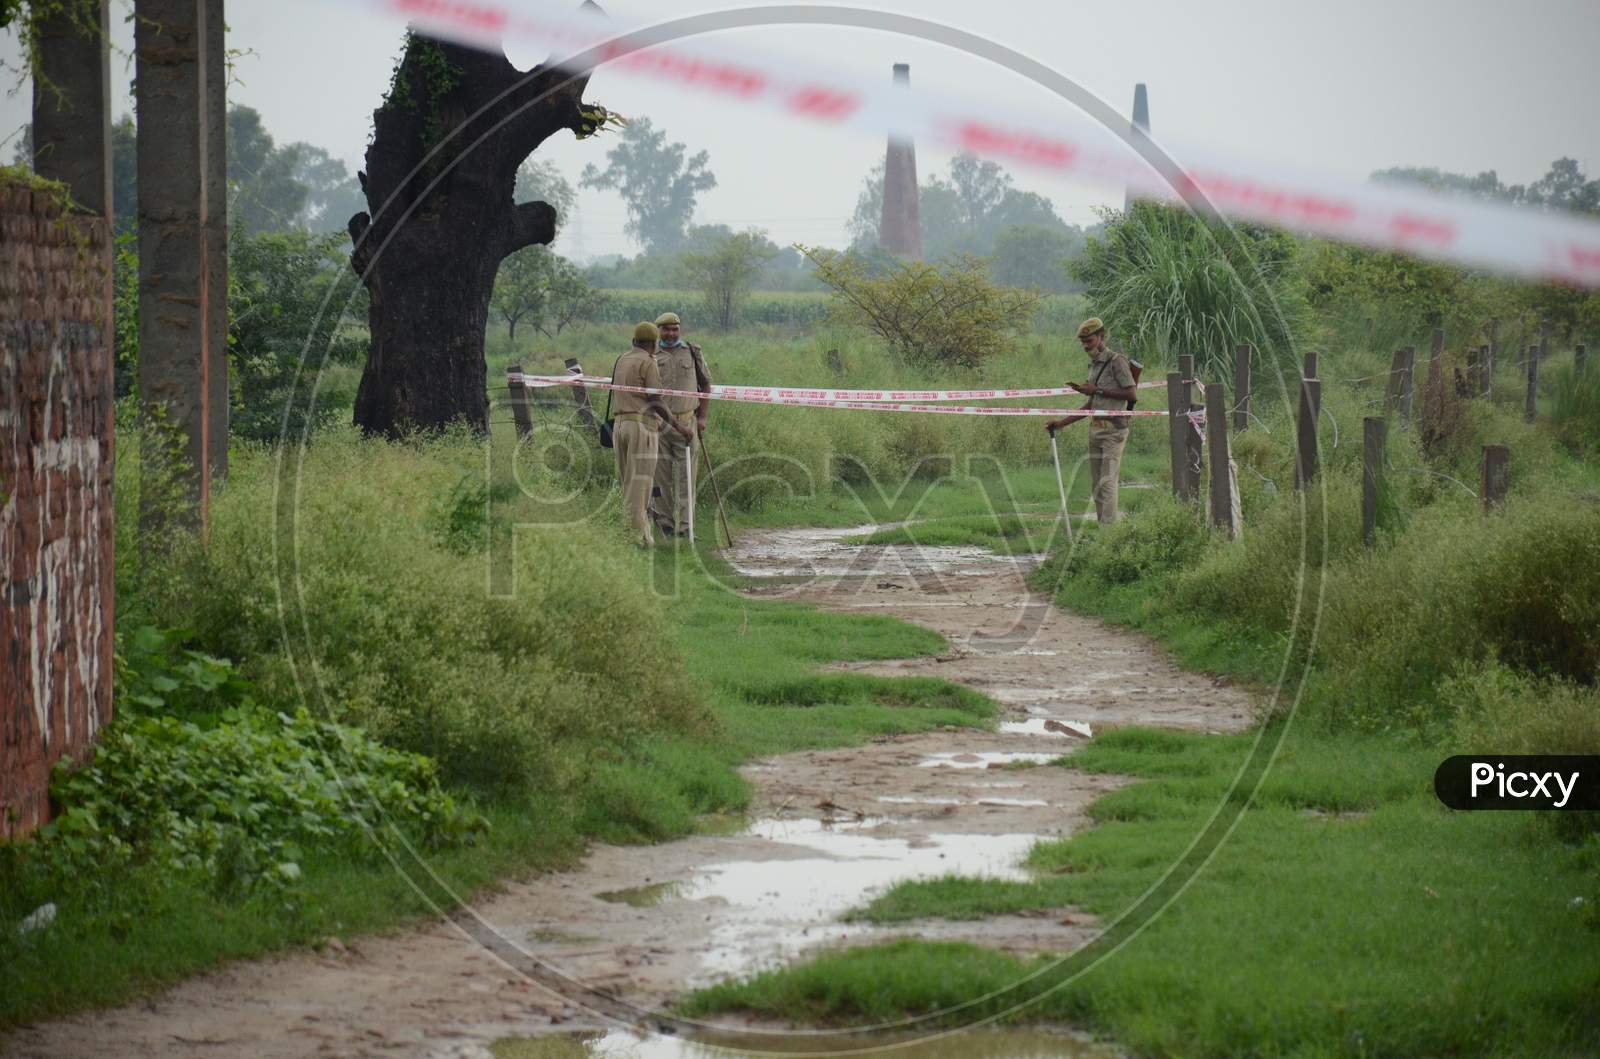 Police officials seal the site of encounter where gangster Vikas Dubey was killed when he tried to escape from police custody in Kanpur, Uttar Pradesh on July 10, 2020